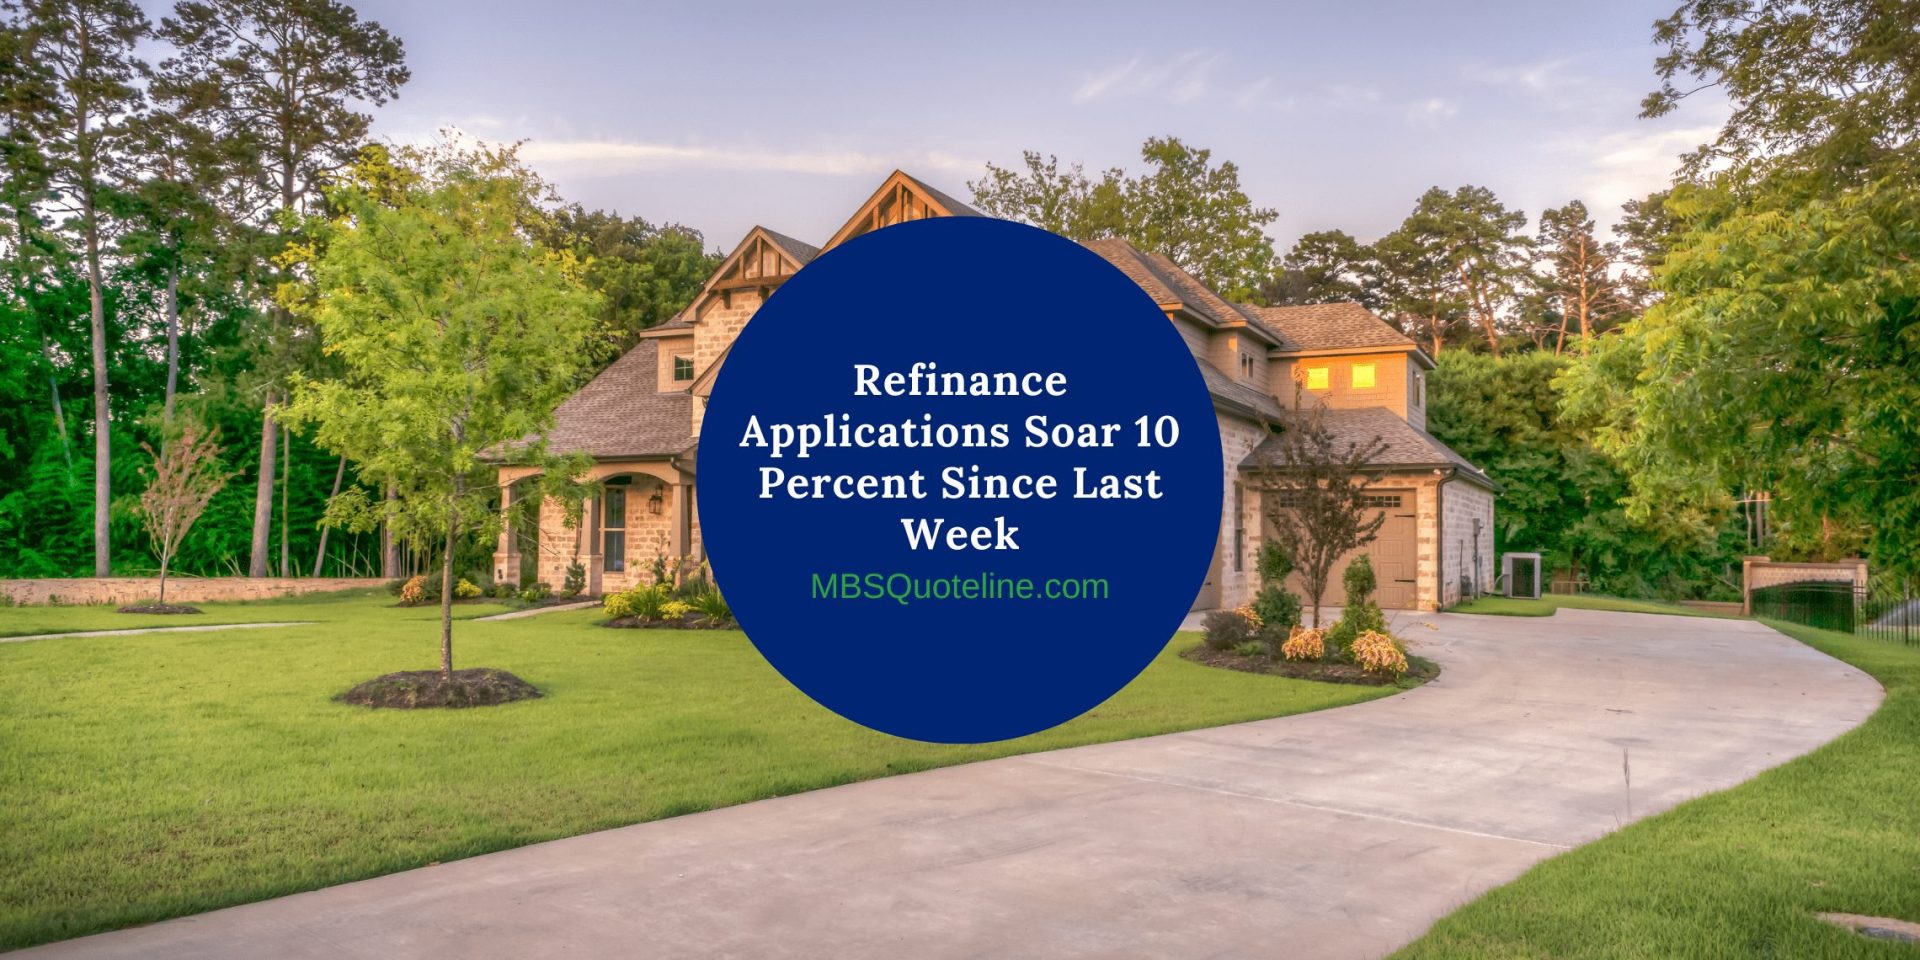 Refinance Applications Soar 10 Percent Since Last Week MortgageTime MBSQuoteline Featured